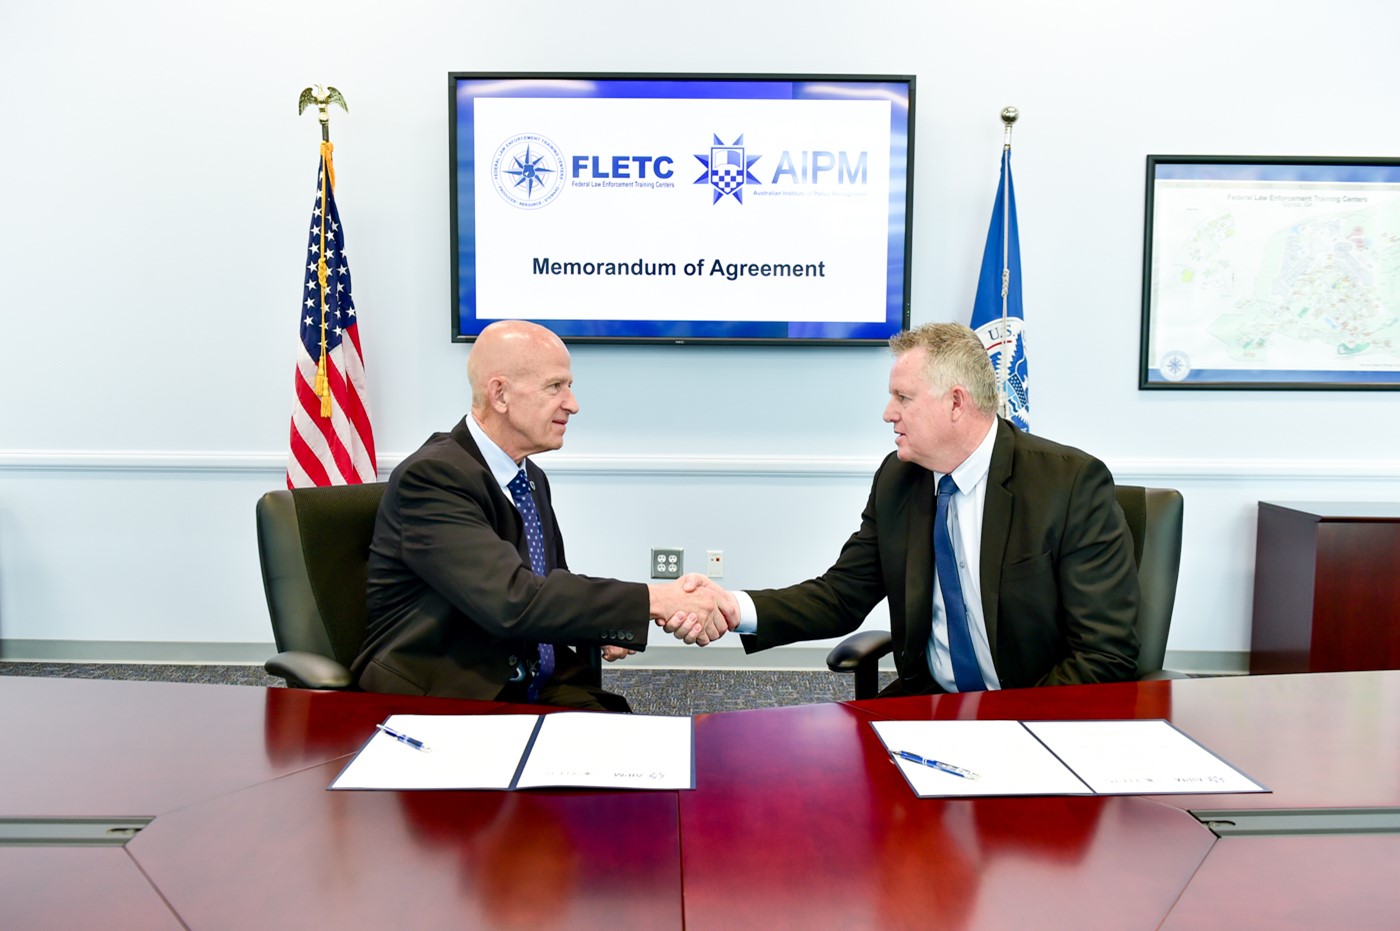 On September 23, 2022, Thomas J. Walters, Director of the Federal Law Enforcement Training Centers (FLETC), and Stuart Bartels, Executive Director of Australian Institute of Police Management (AIPM), shake hands after signing a Memorandum of Agreement to collaborate as training partners in professional exchanges. (Photo by David Tucker/FLETC)